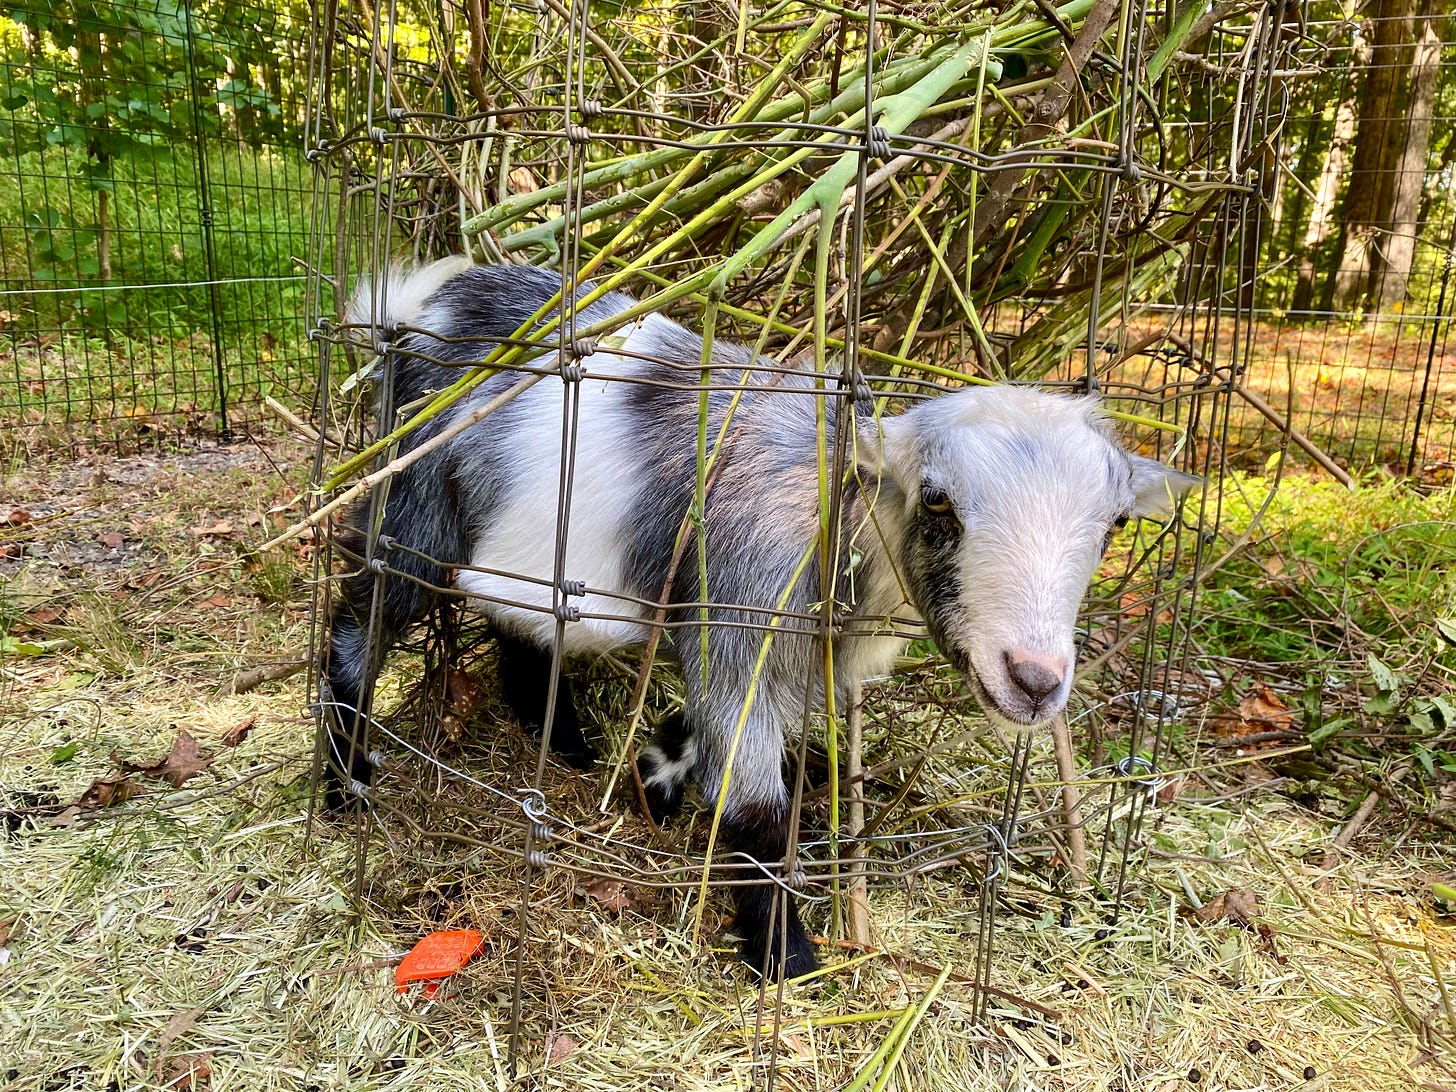 Gray goat stuck in fence